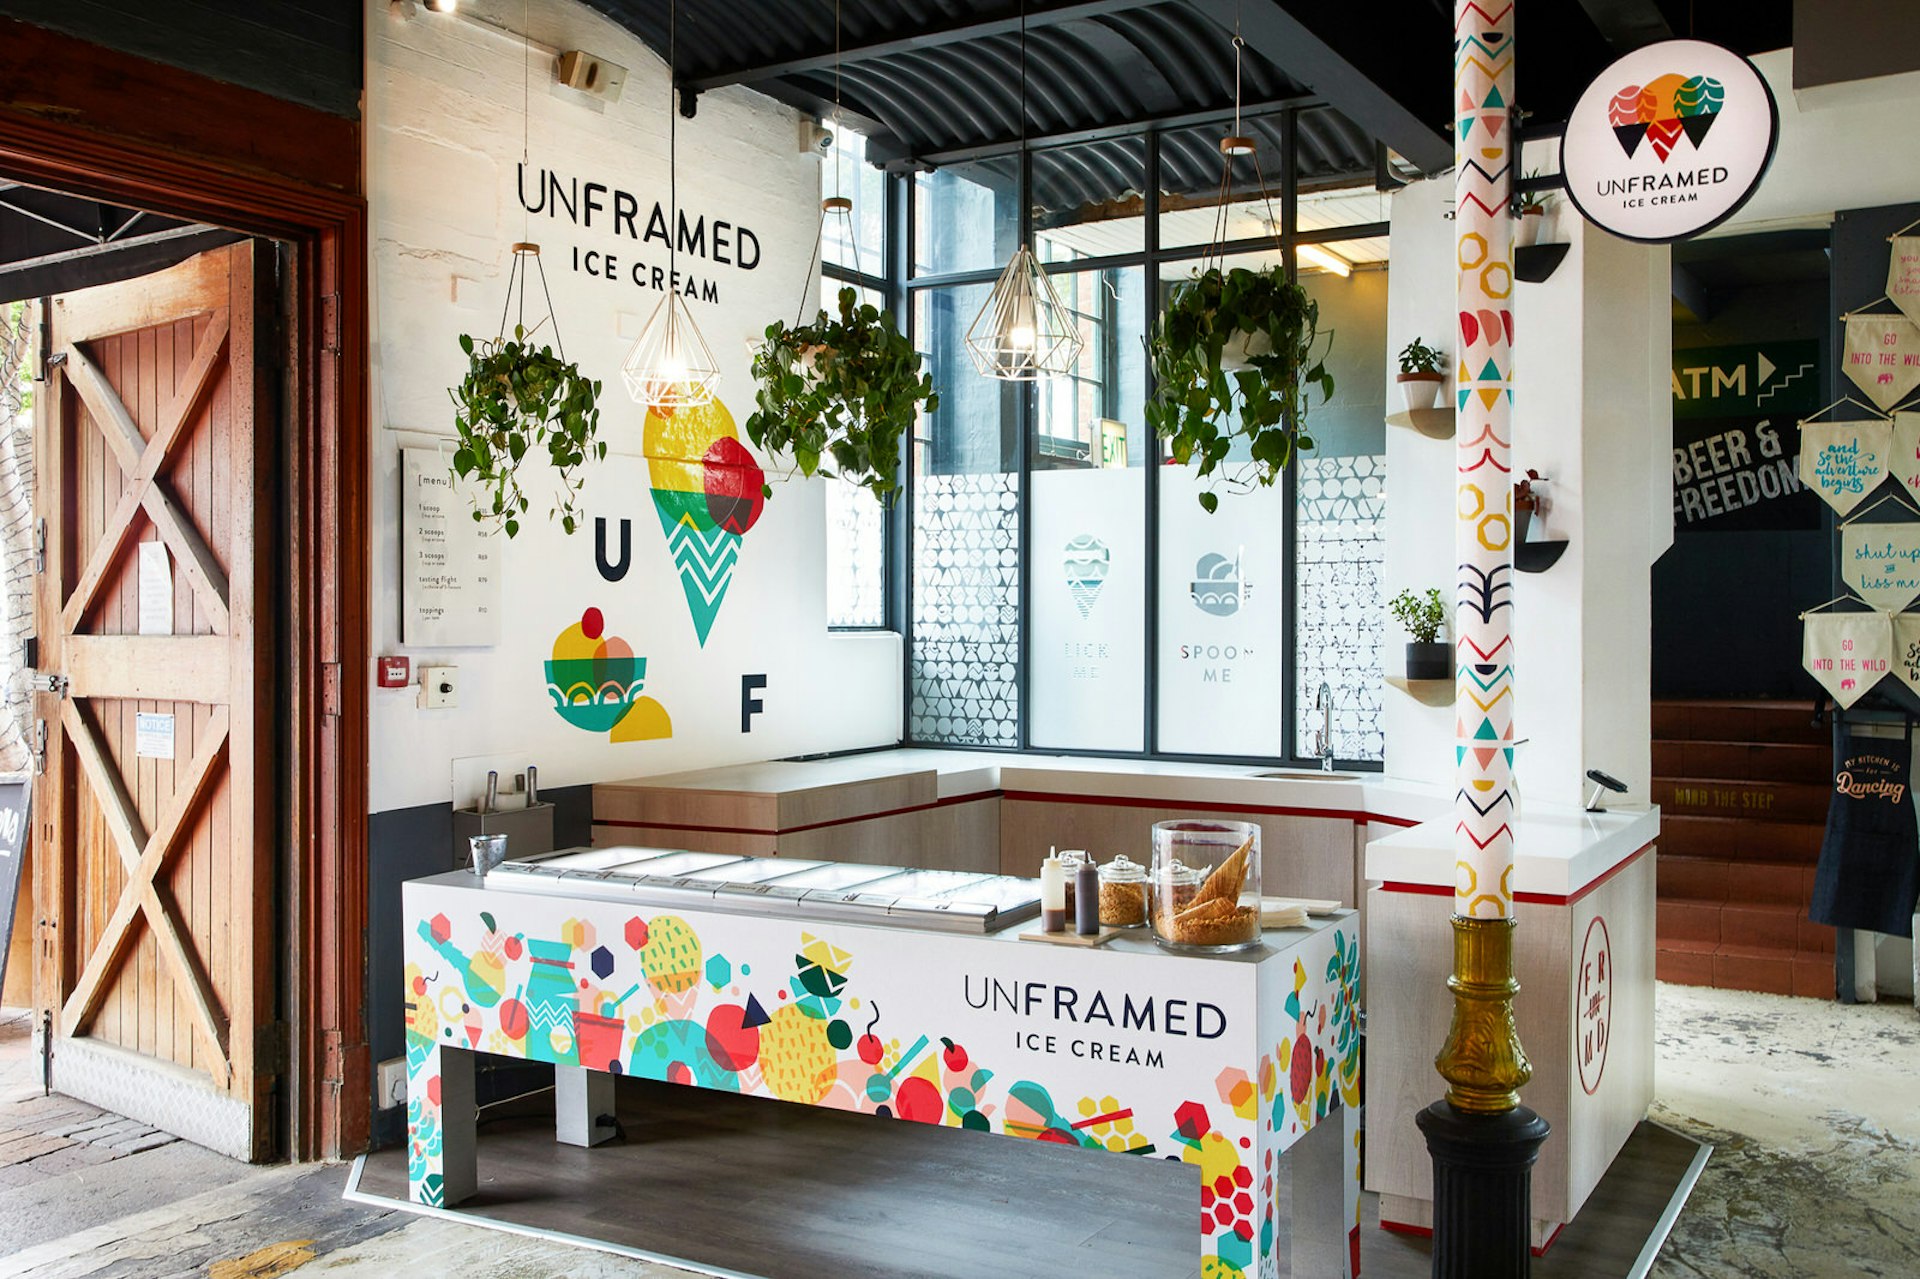 A large barn-like wooden door hangs open and lets light fill the bright interior of Unframed; white walls are covered in vibrant murals of abstract cones and ice cream scoops, with a dark grey ceiling high above